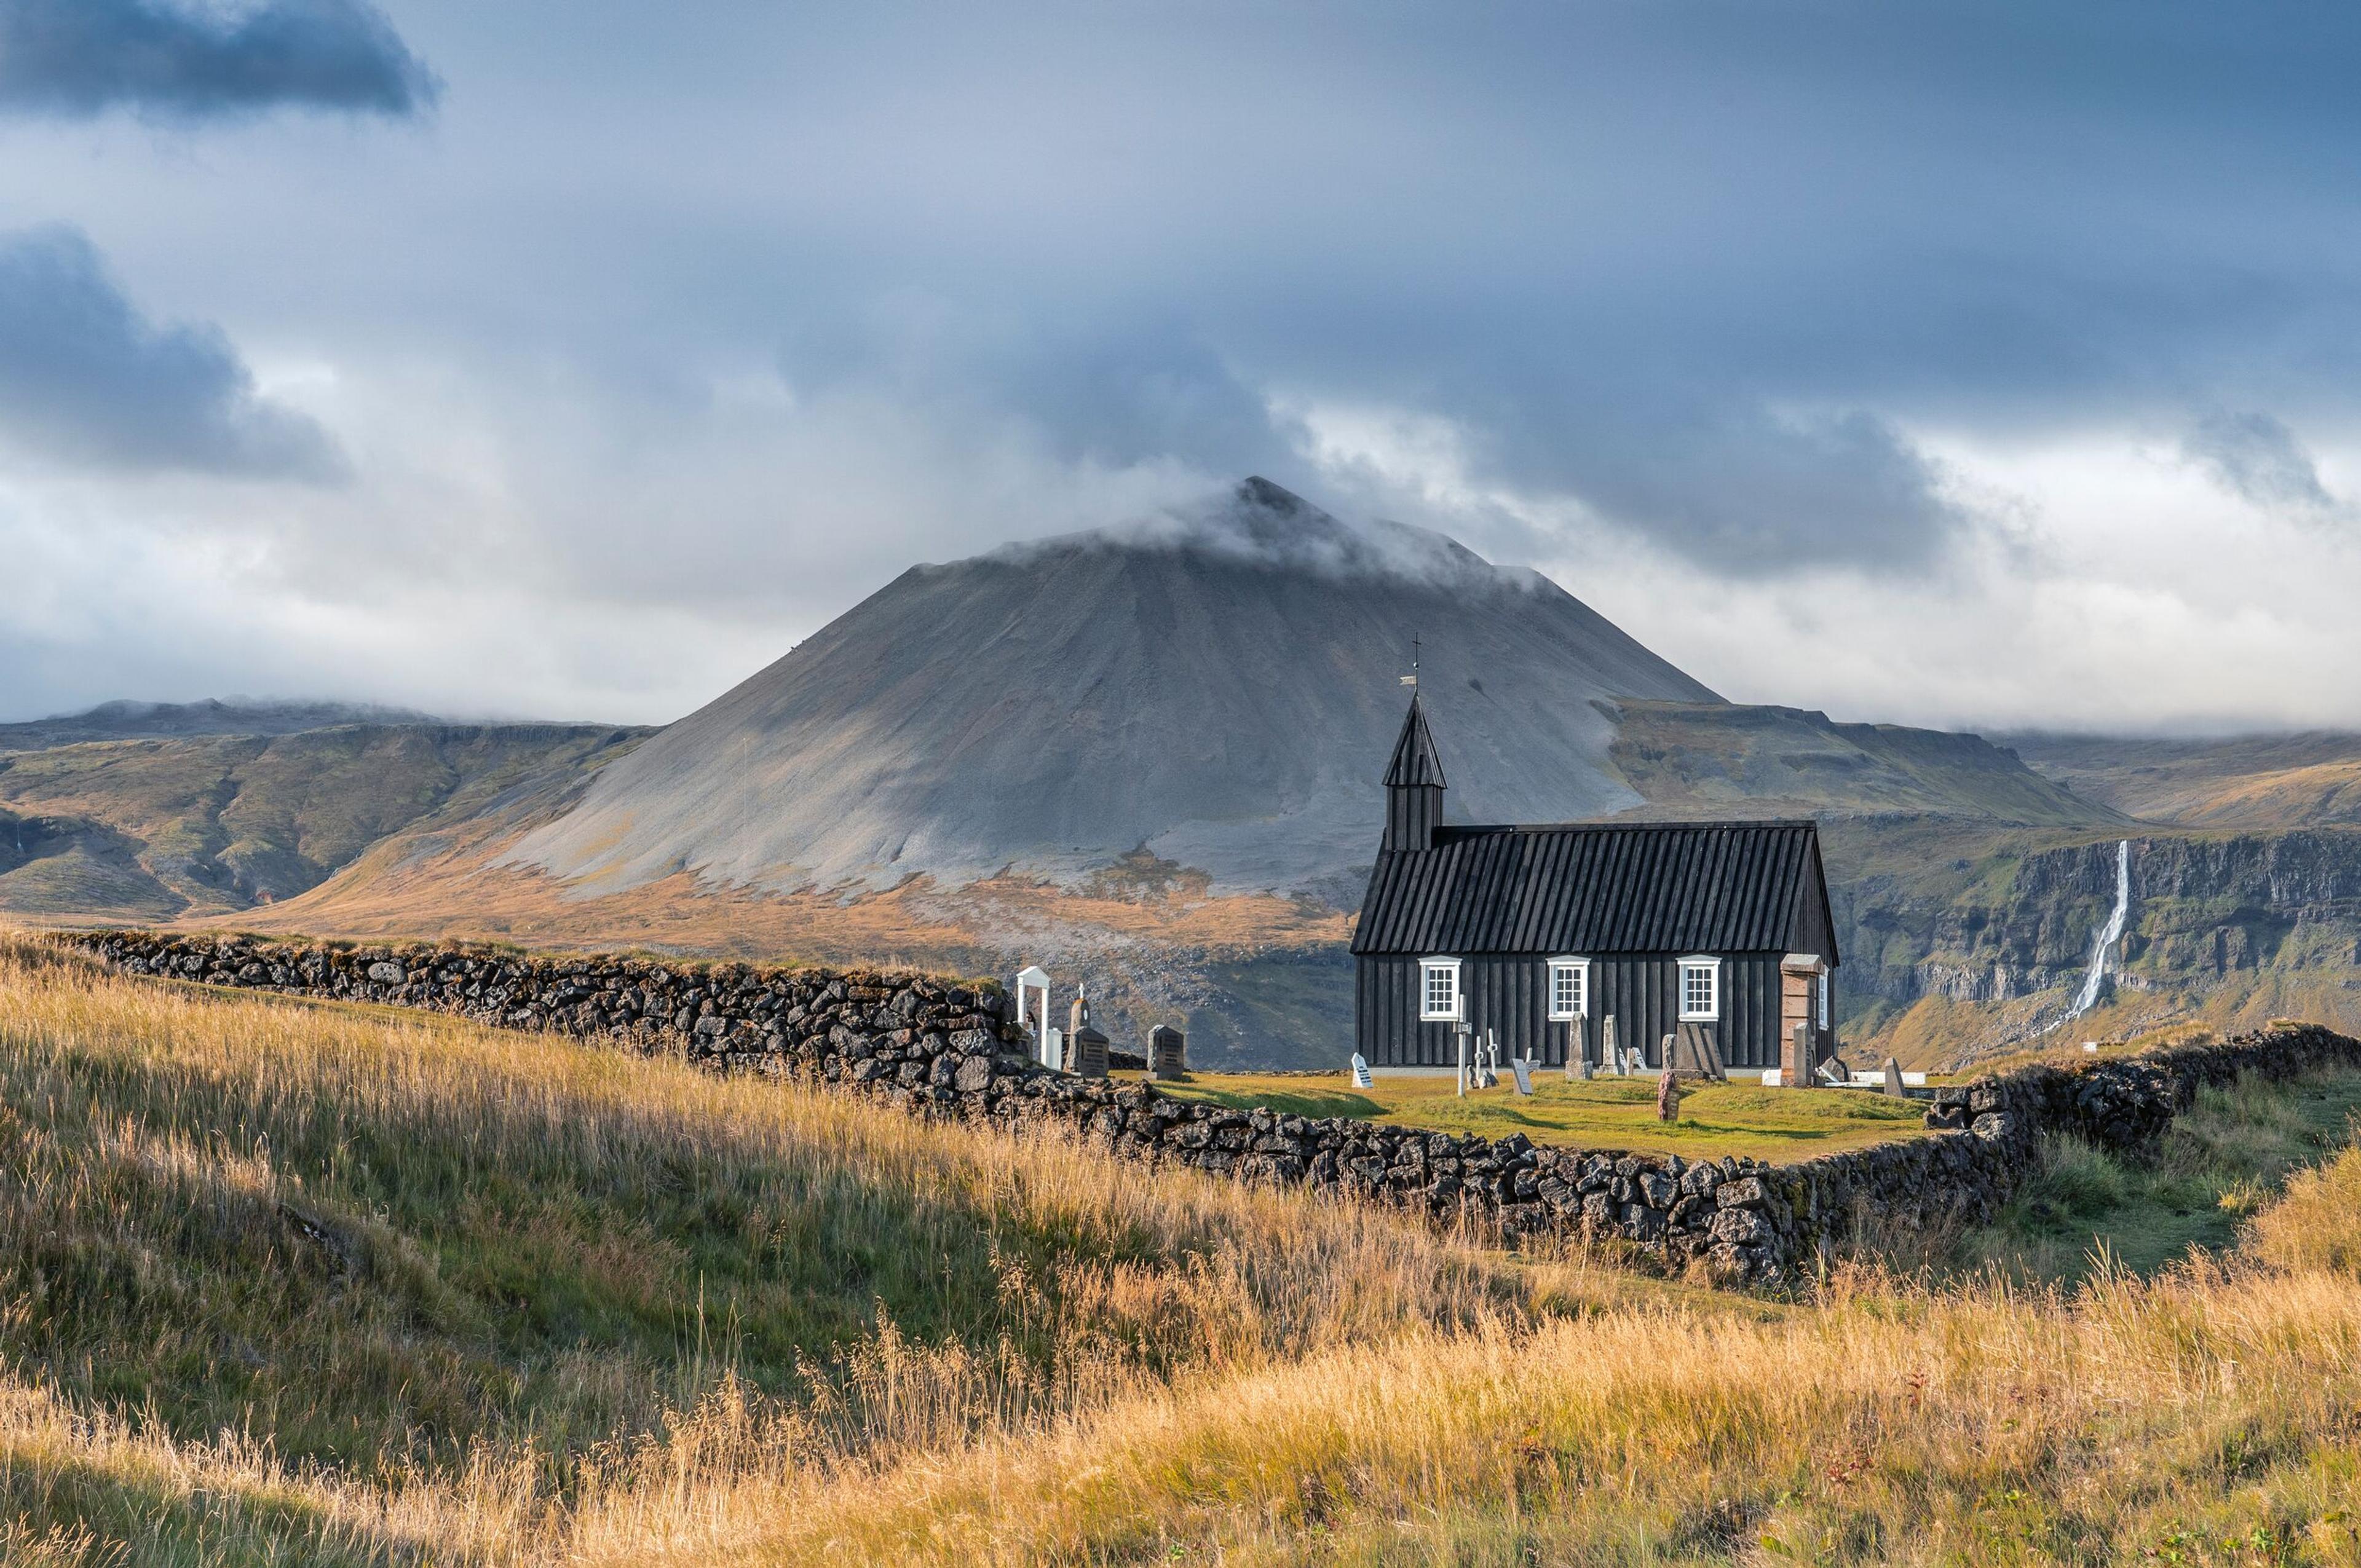 A quaint black church with a pointed roof, surrounded by a stone wall, stands in a grassy field with a majestic, mist-covered mountain in the background.